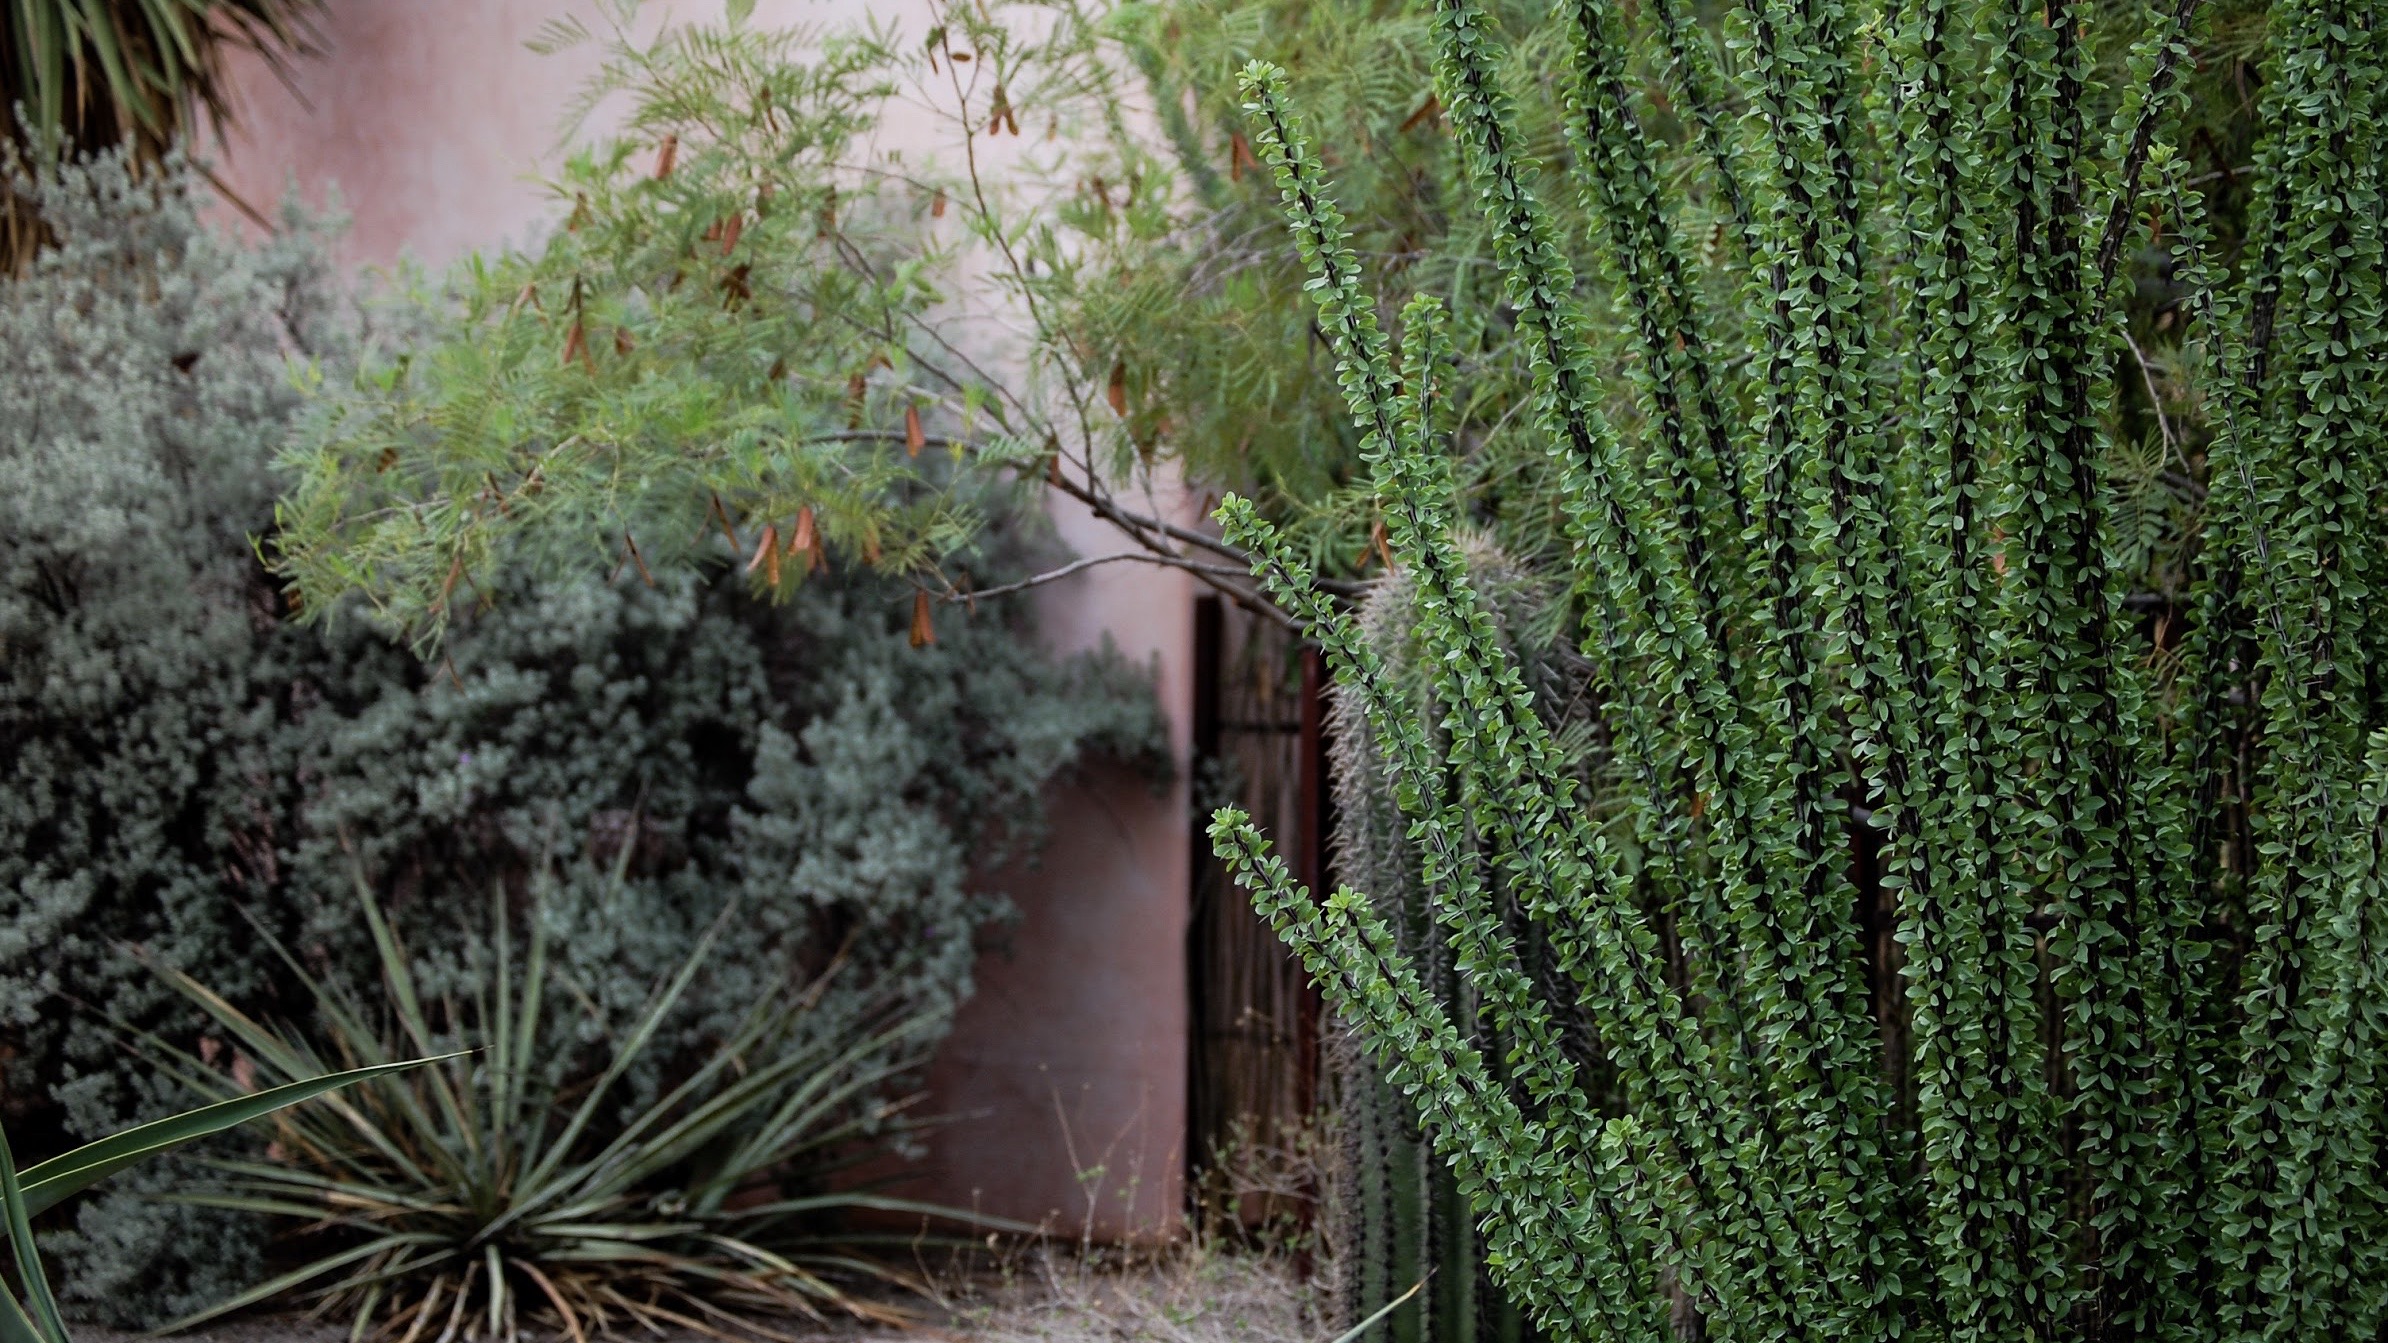 A photo depicting Tucson scenery, focusing plants in the backyard